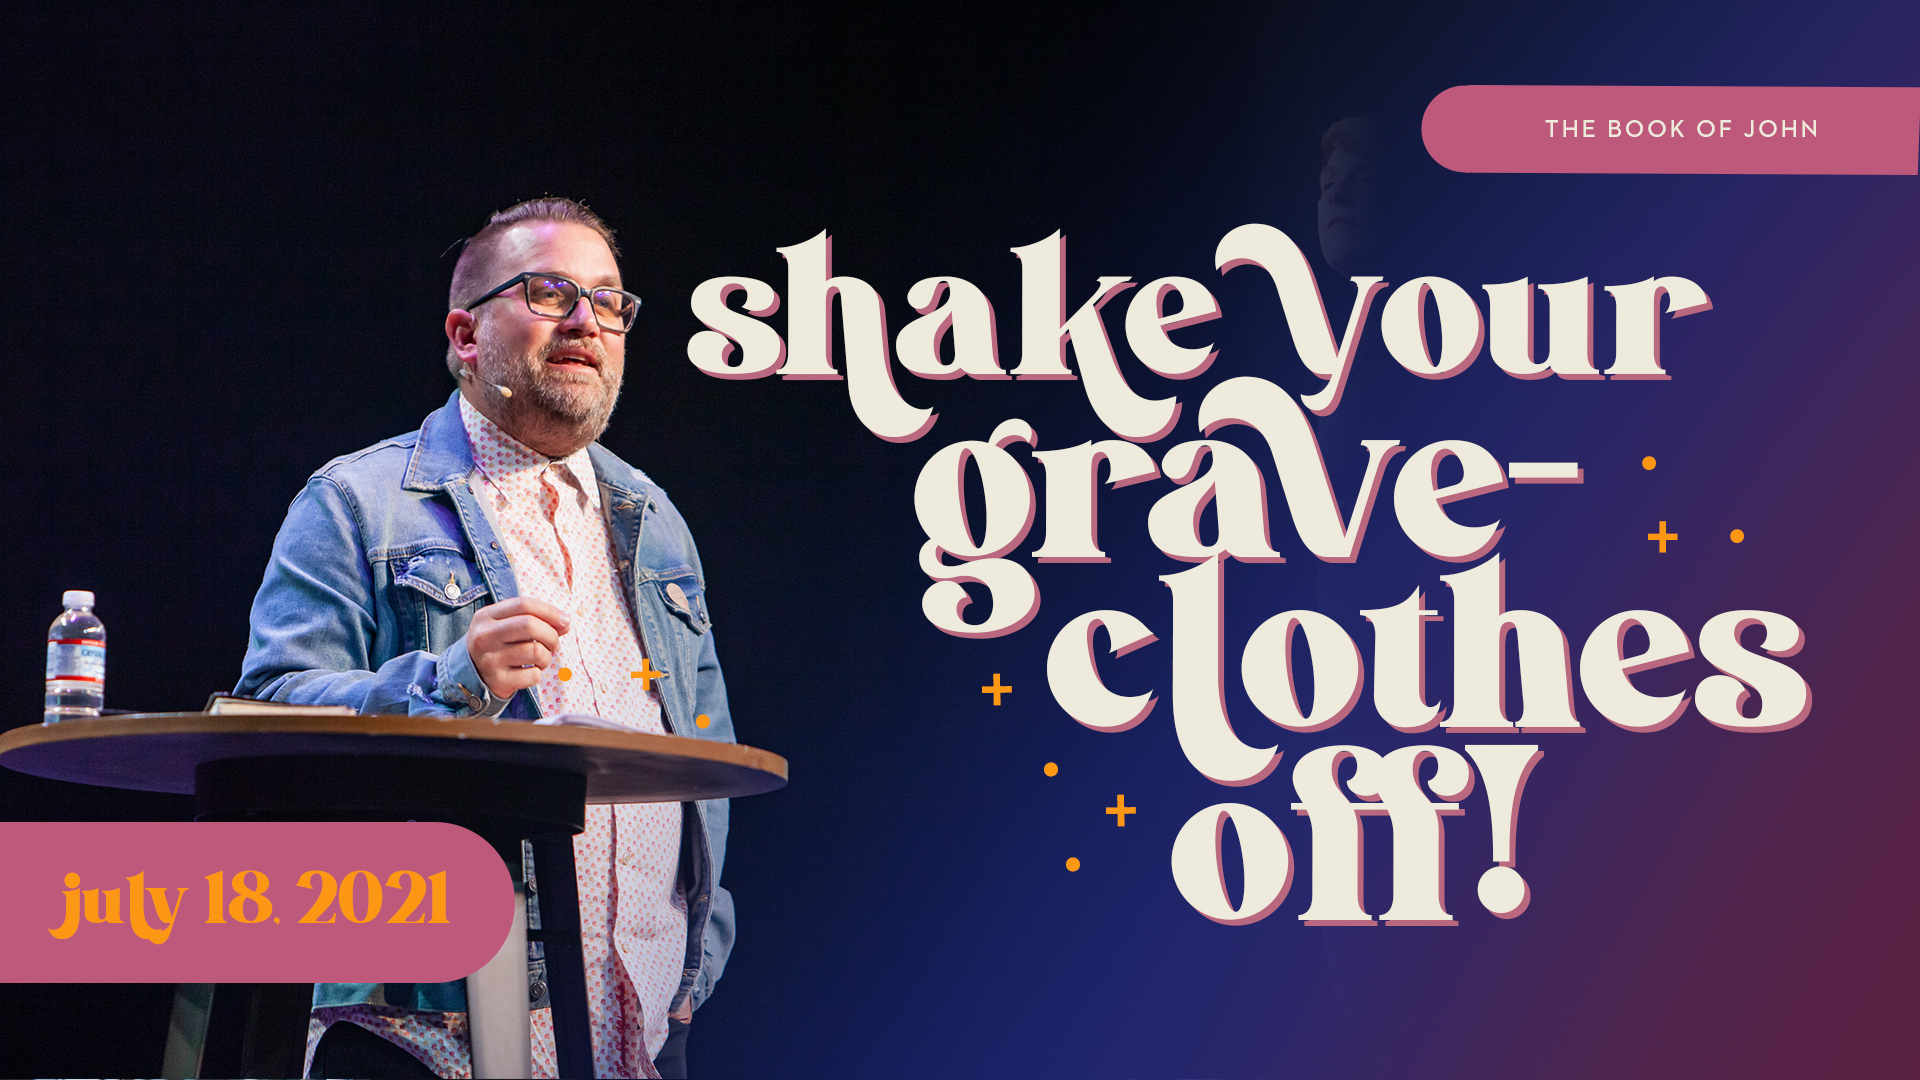 Shake Your Graveclothes off - Death to Life